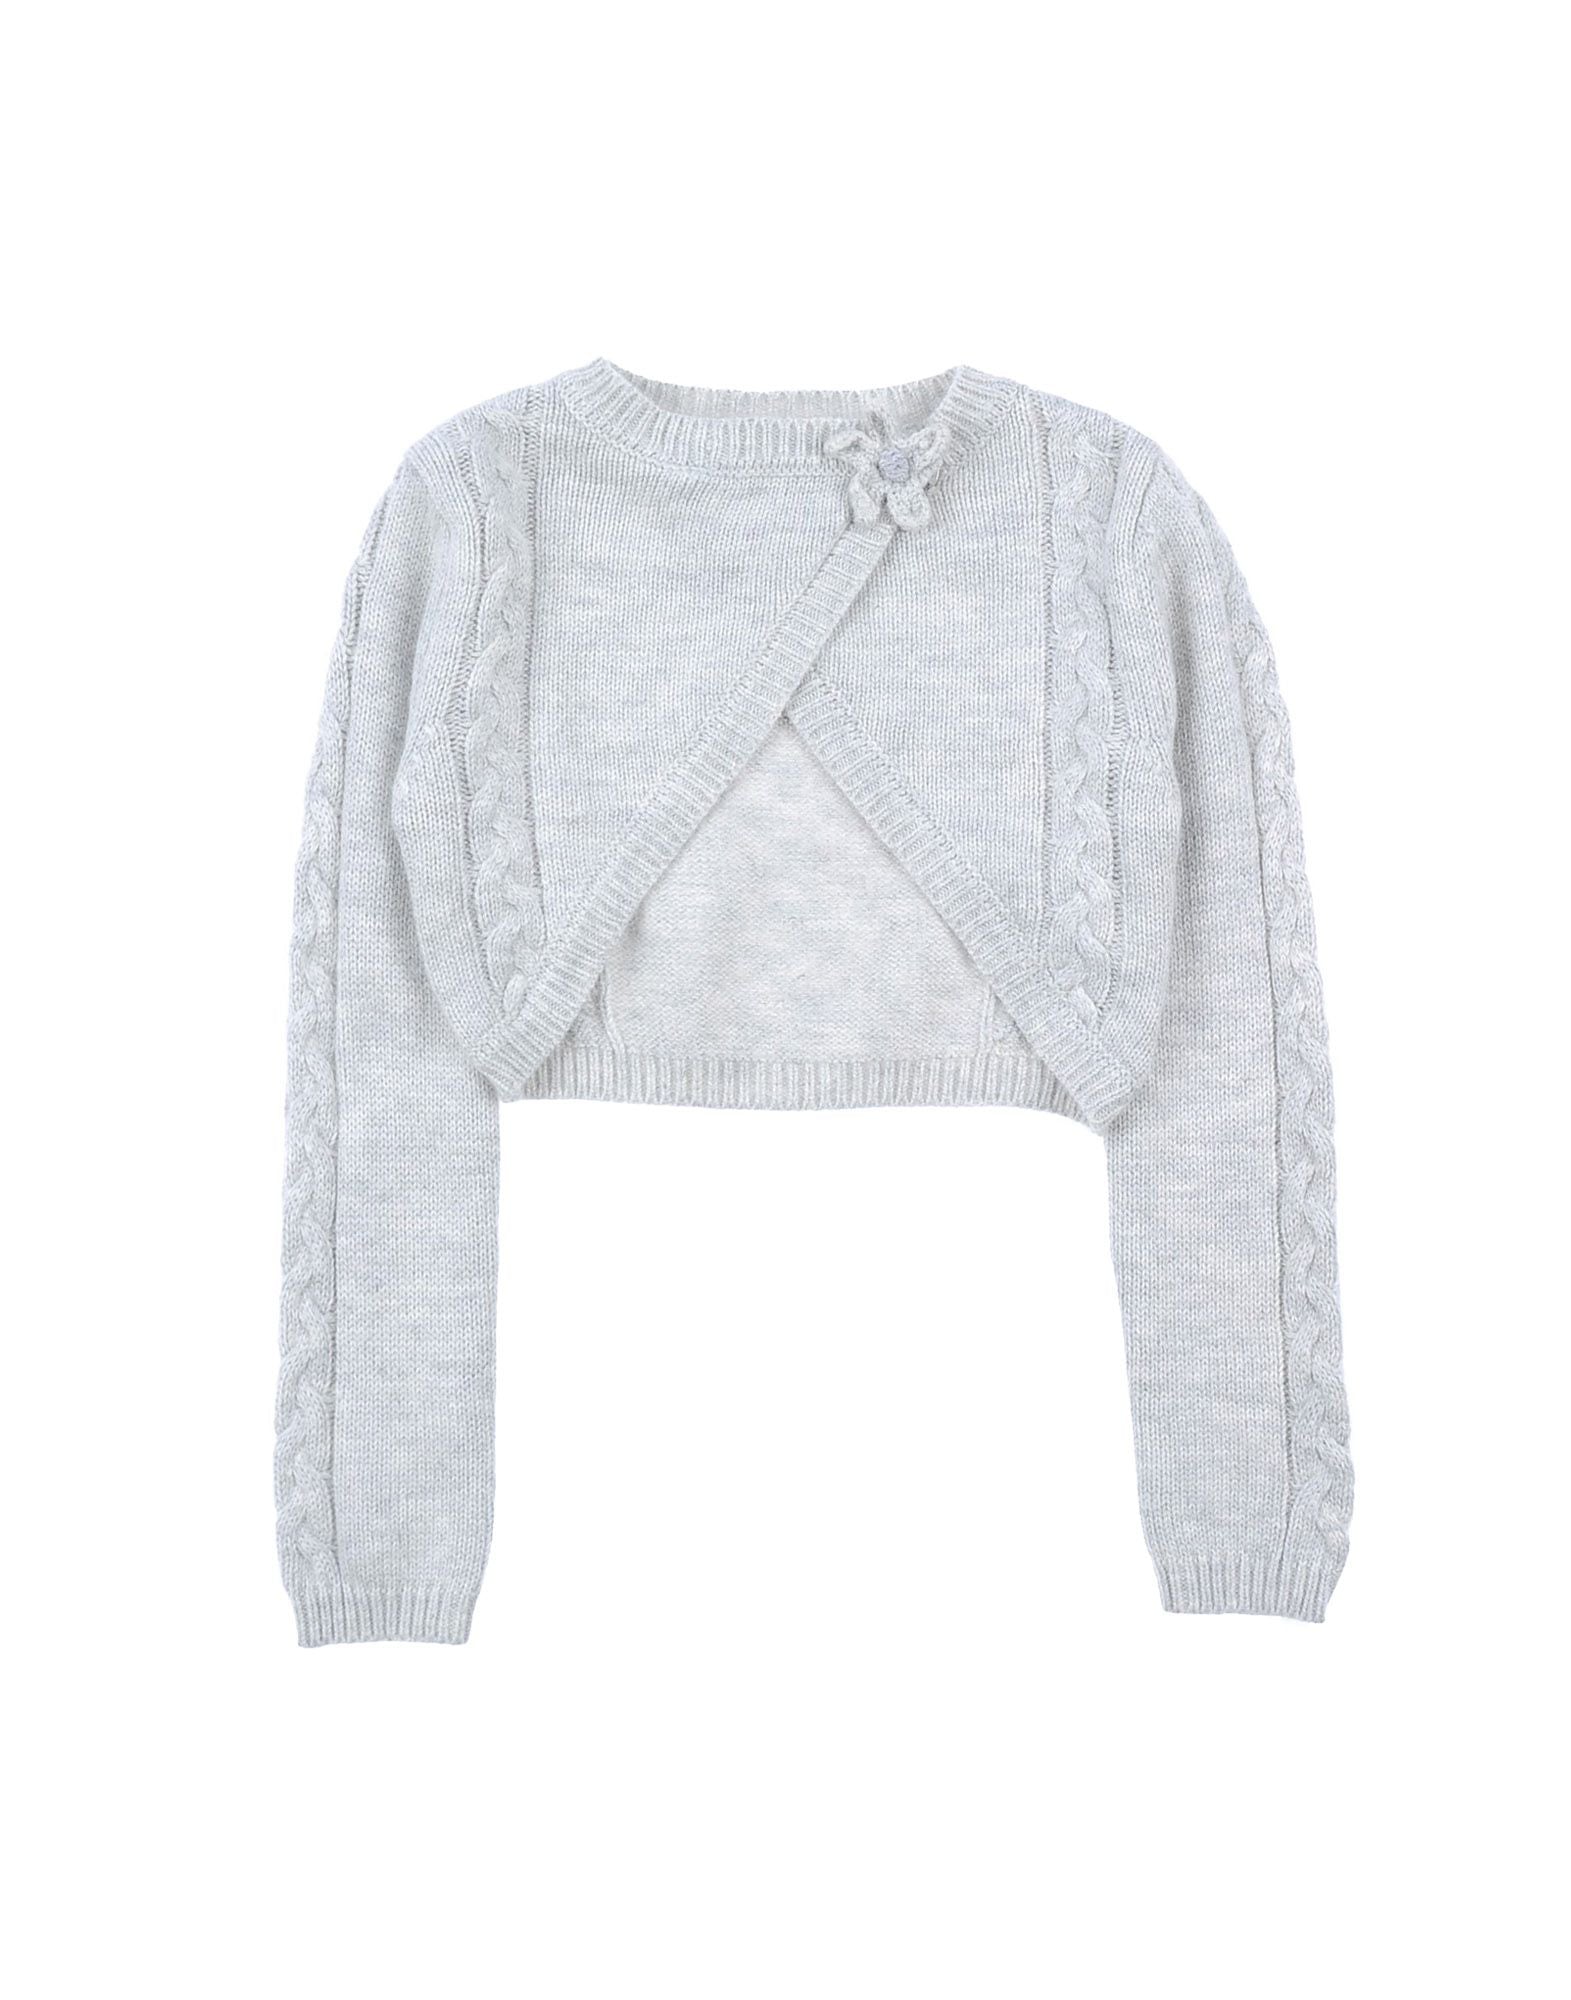 
  Cardigan in tricot from the Mirtillo Clothing Girl's line, crossed at the front
  and with a f...